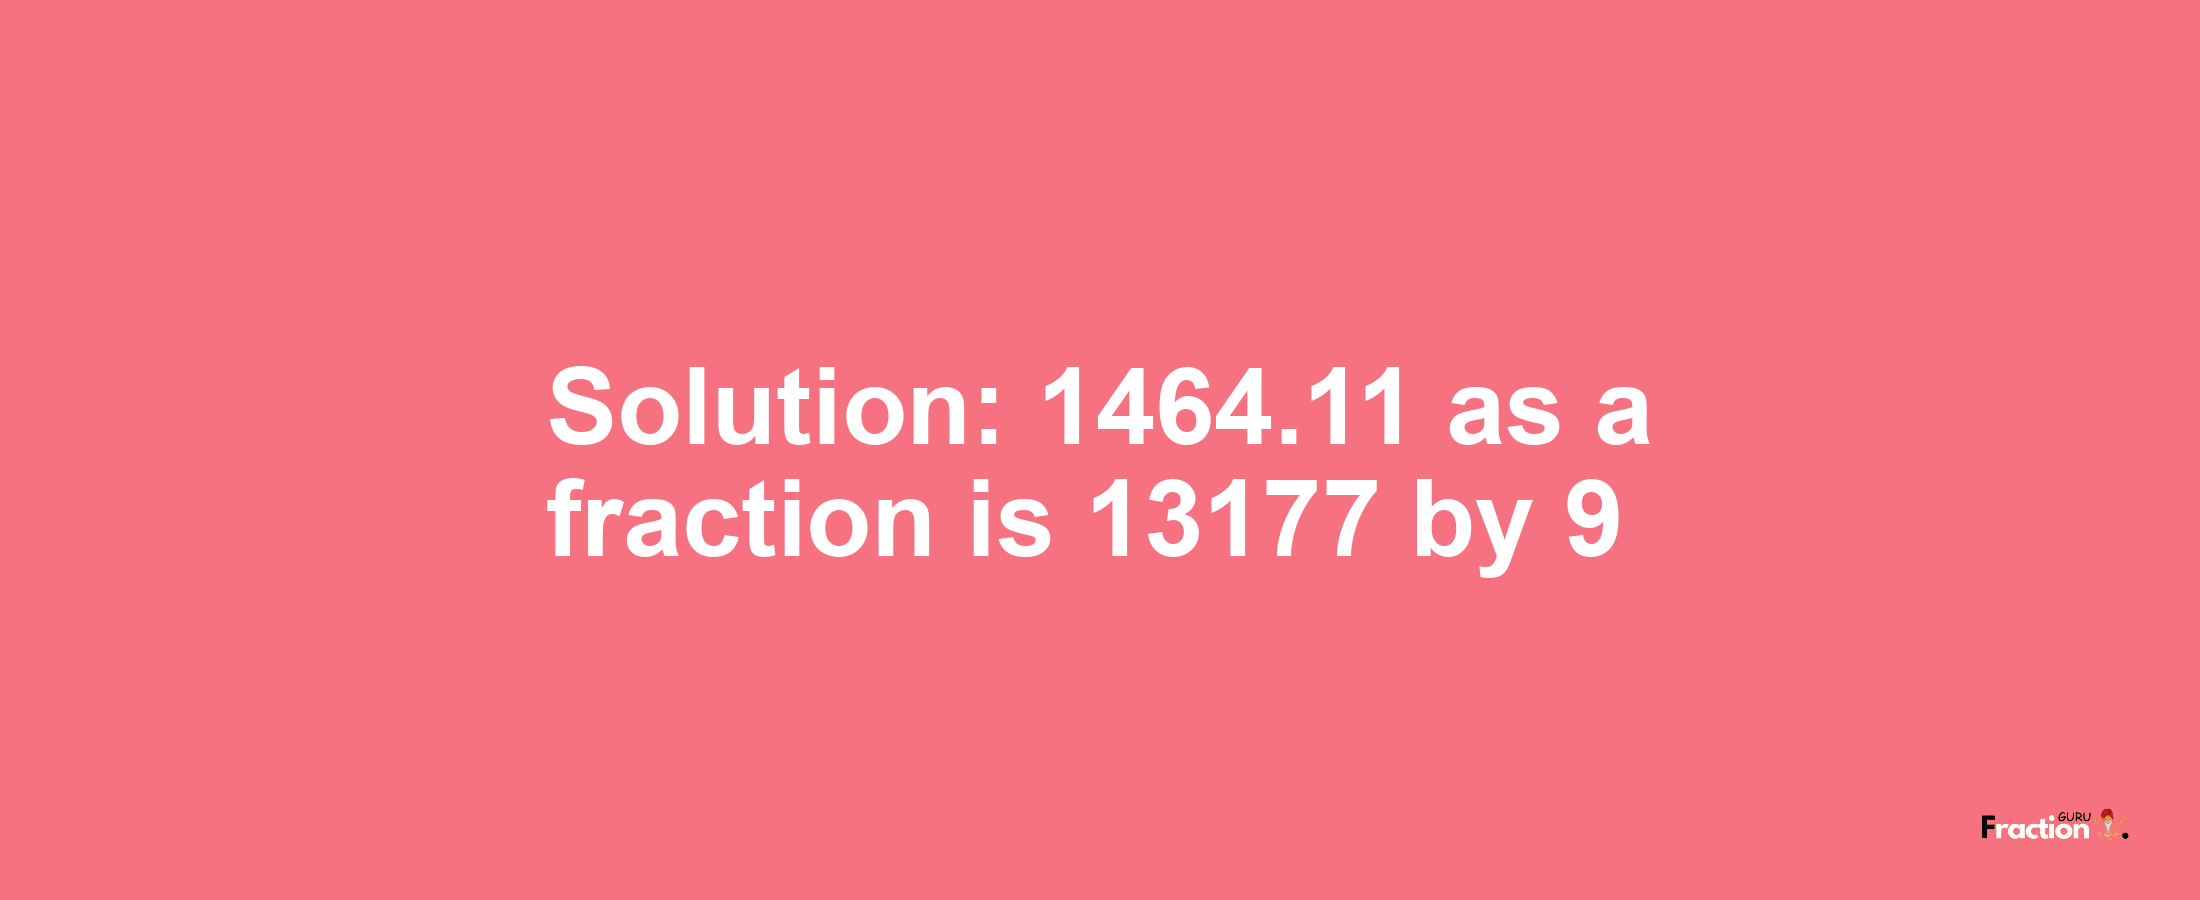 Solution:1464.11 as a fraction is 13177/9